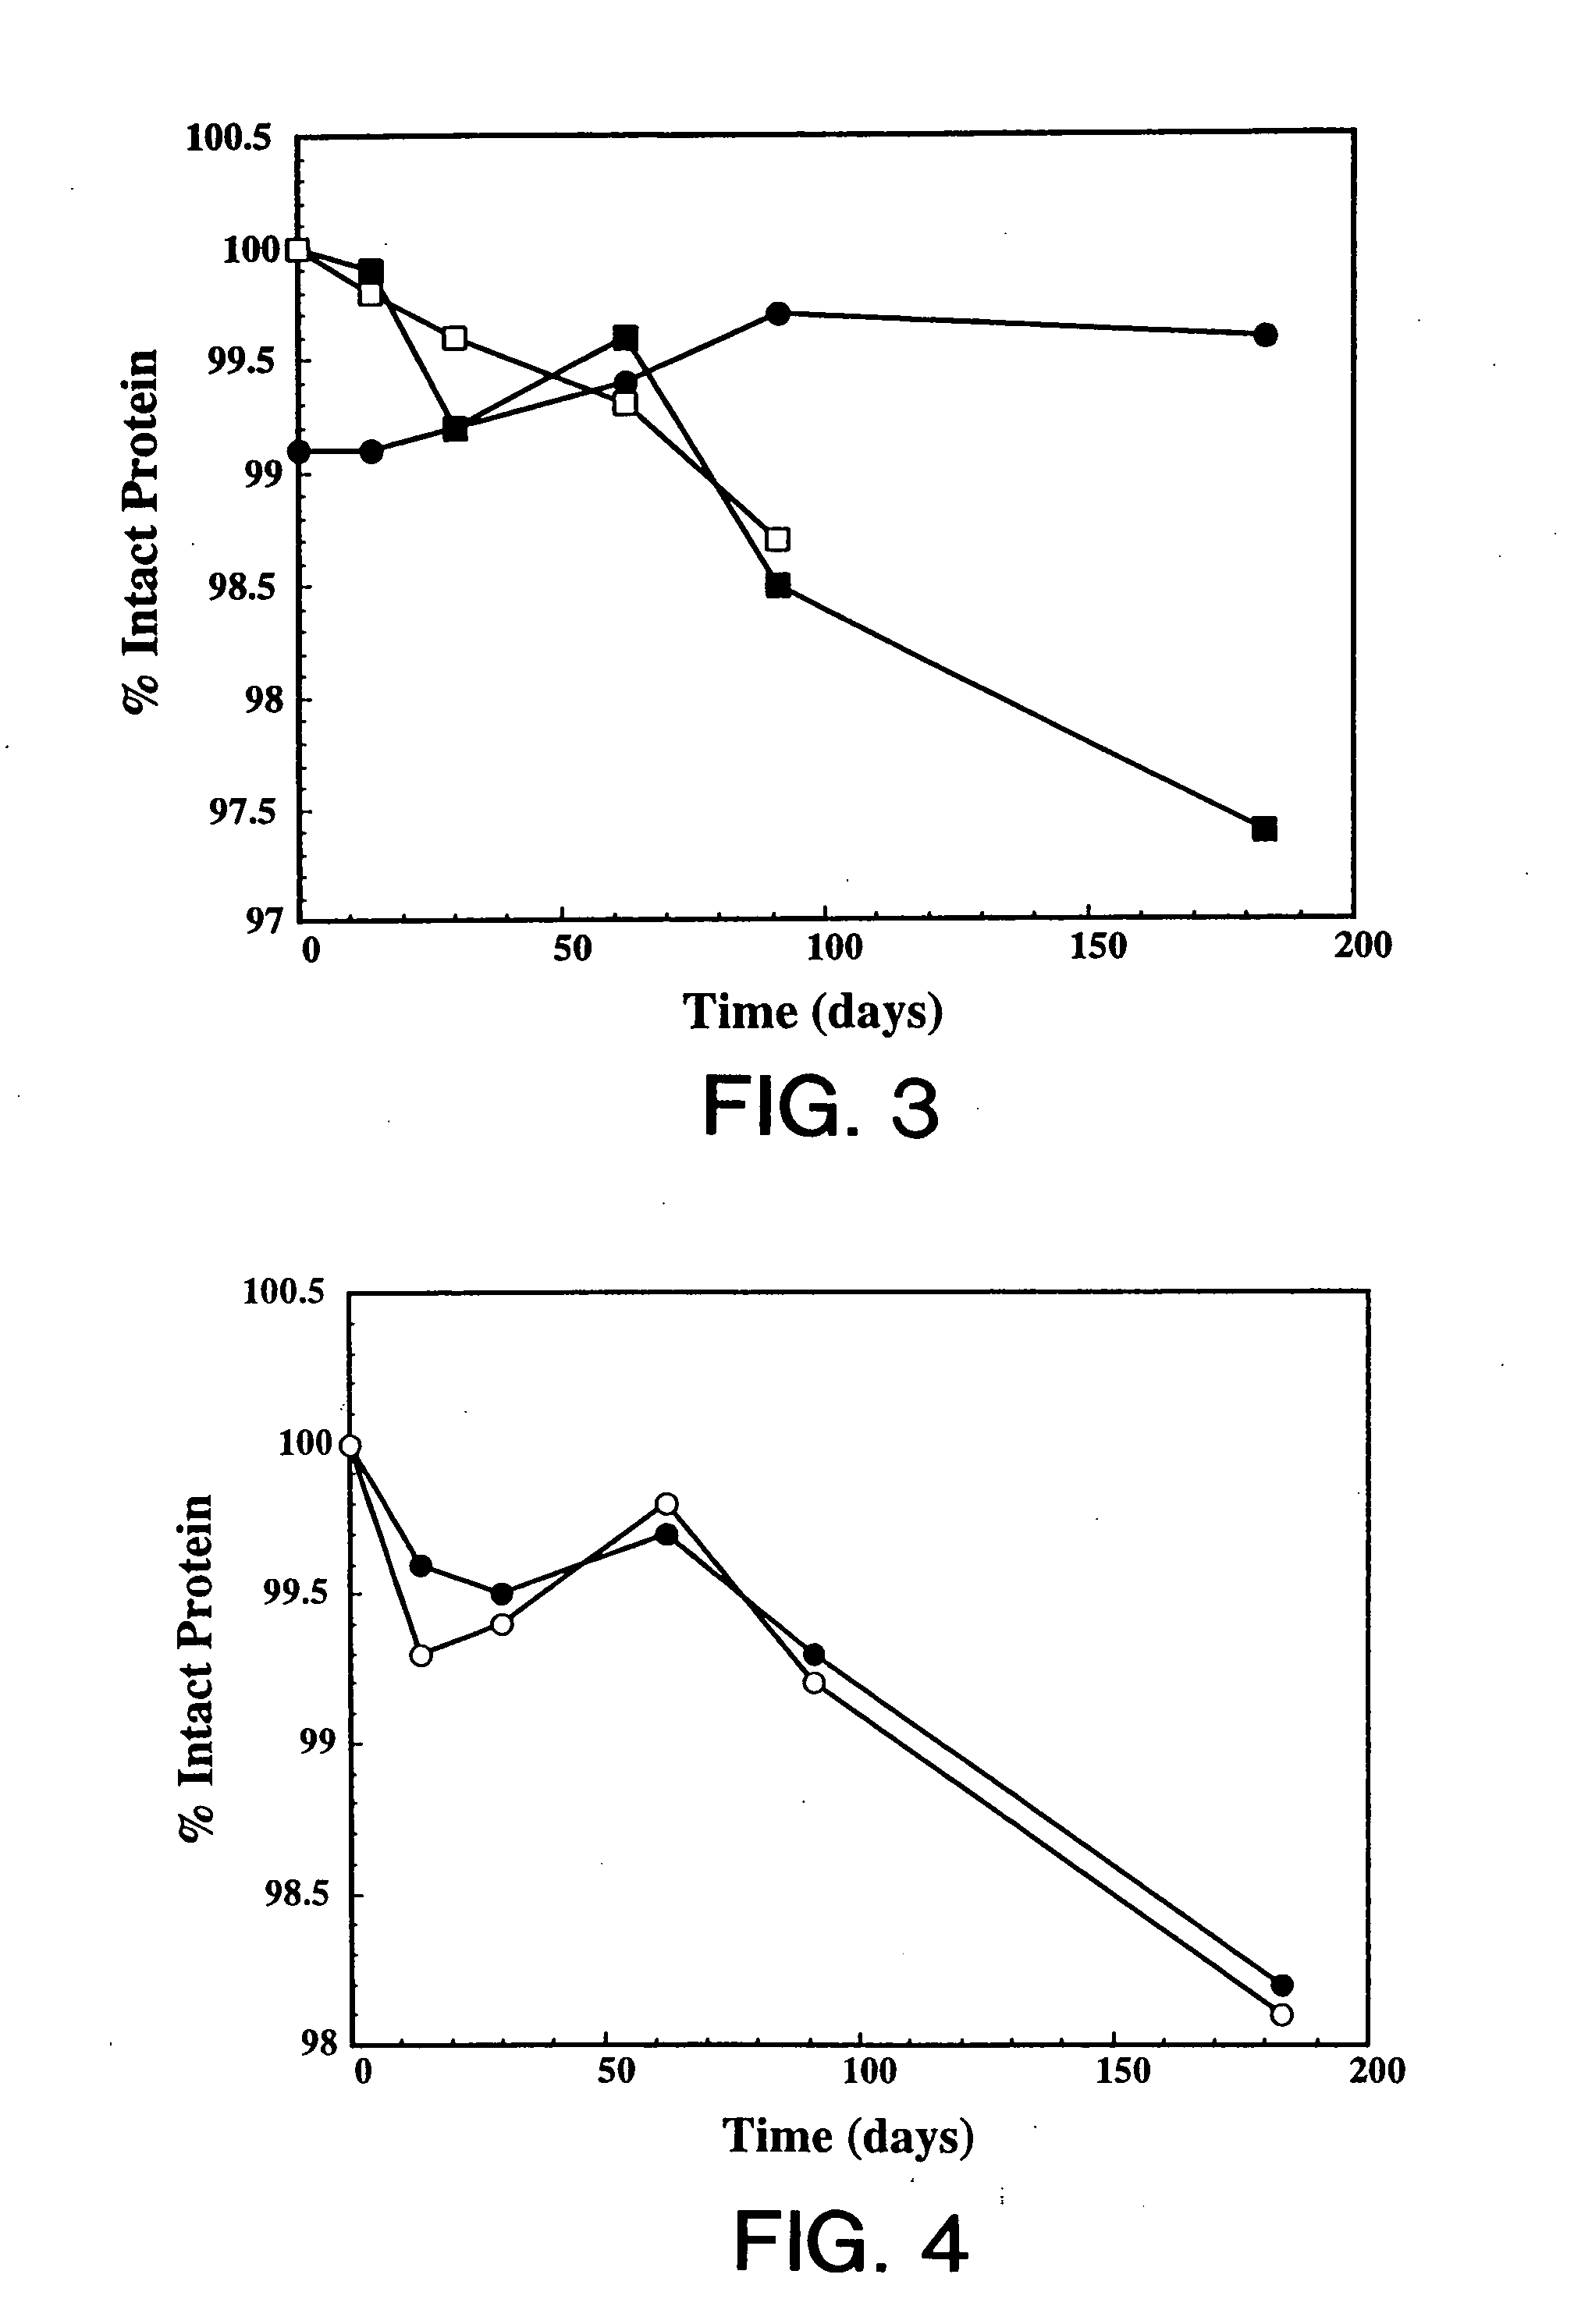 Treating a mammal with a formulation comprising an antibody which binds IgE